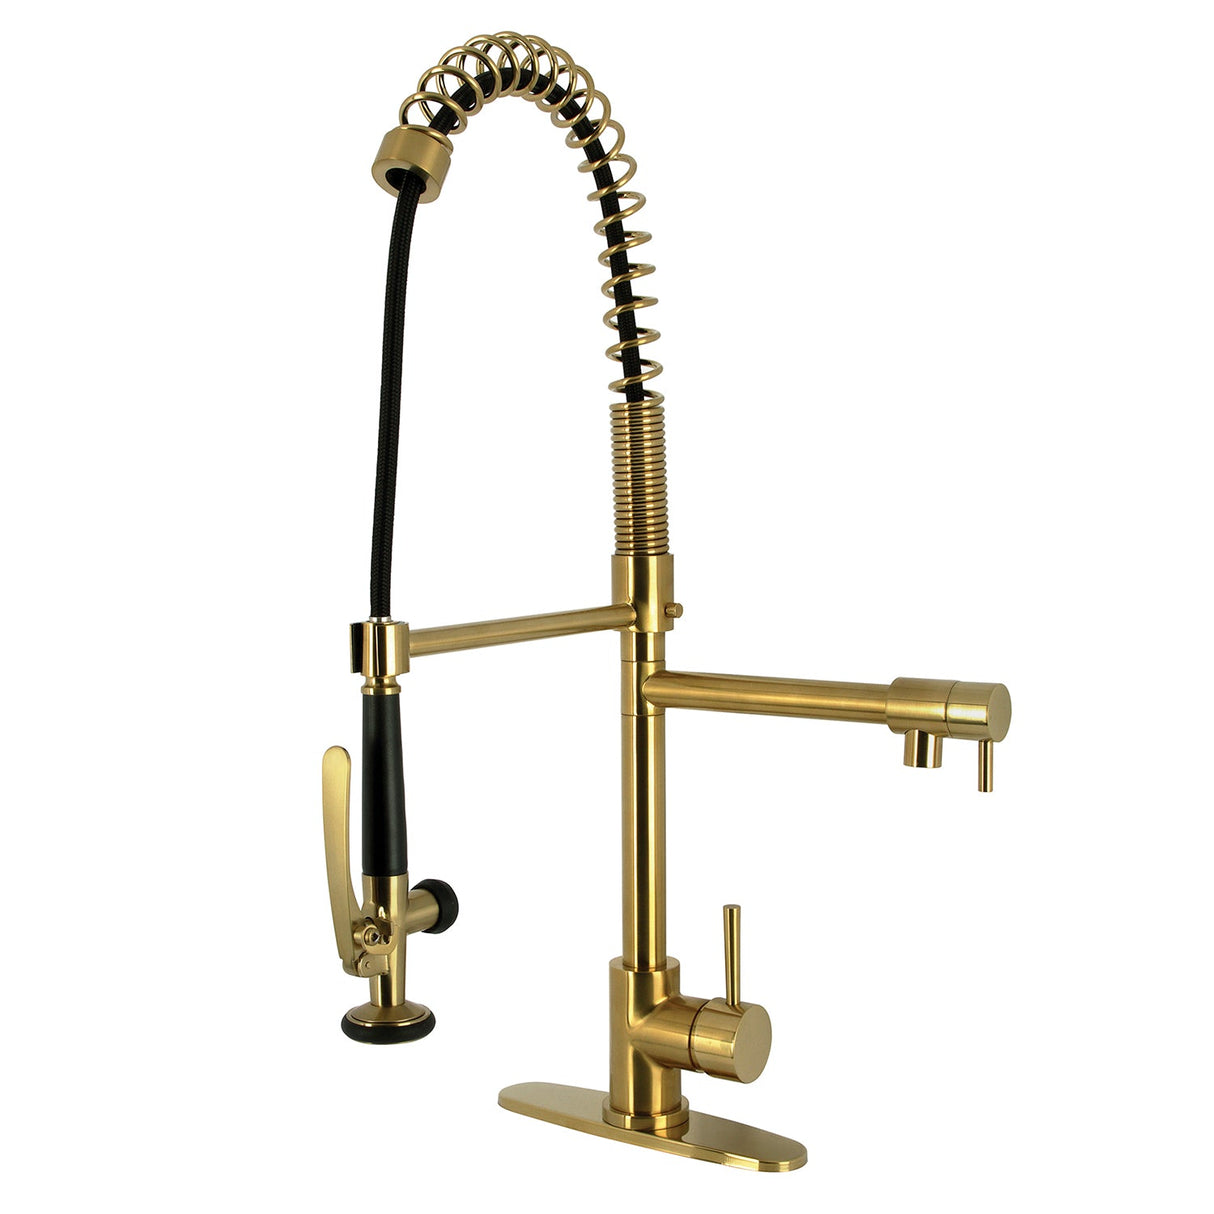 Concord LS8503DL Single-Handle 1-Hole Deck Mount Pre-Rinse Kitchen Faucet, Brushed Brass